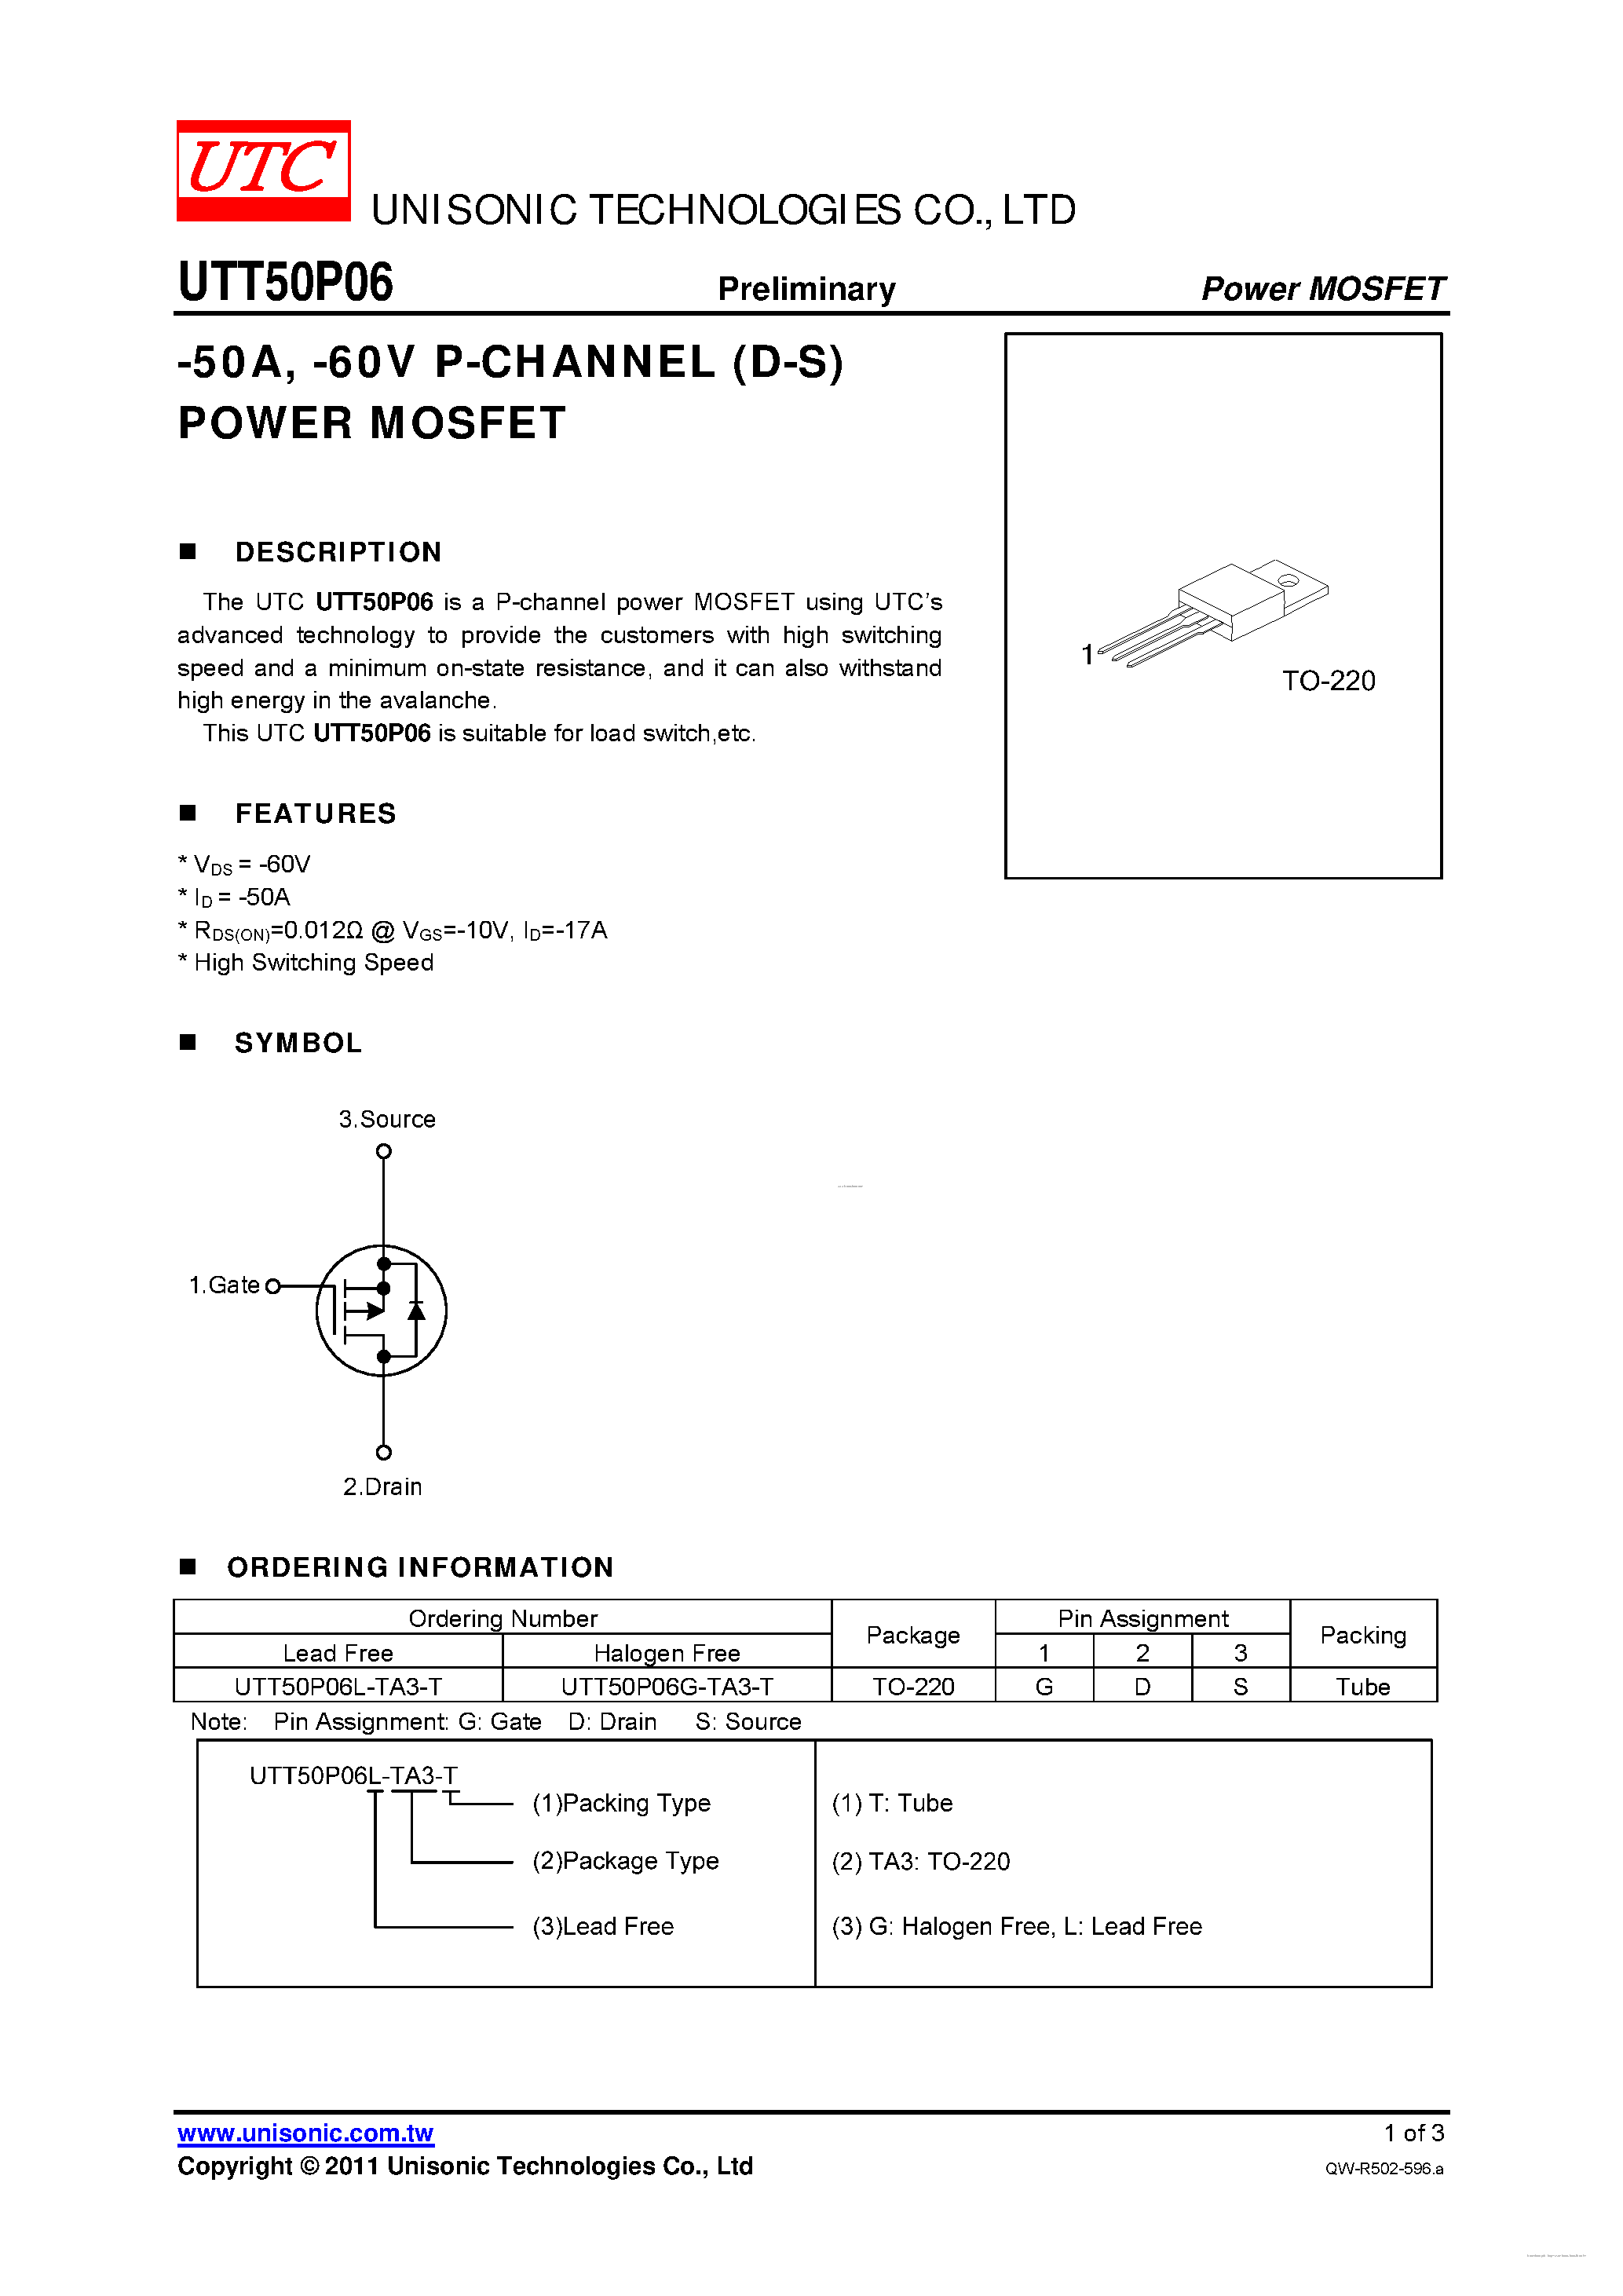 Даташит UTT50P06 - P-CHANNEL POWER MOSFET страница 1